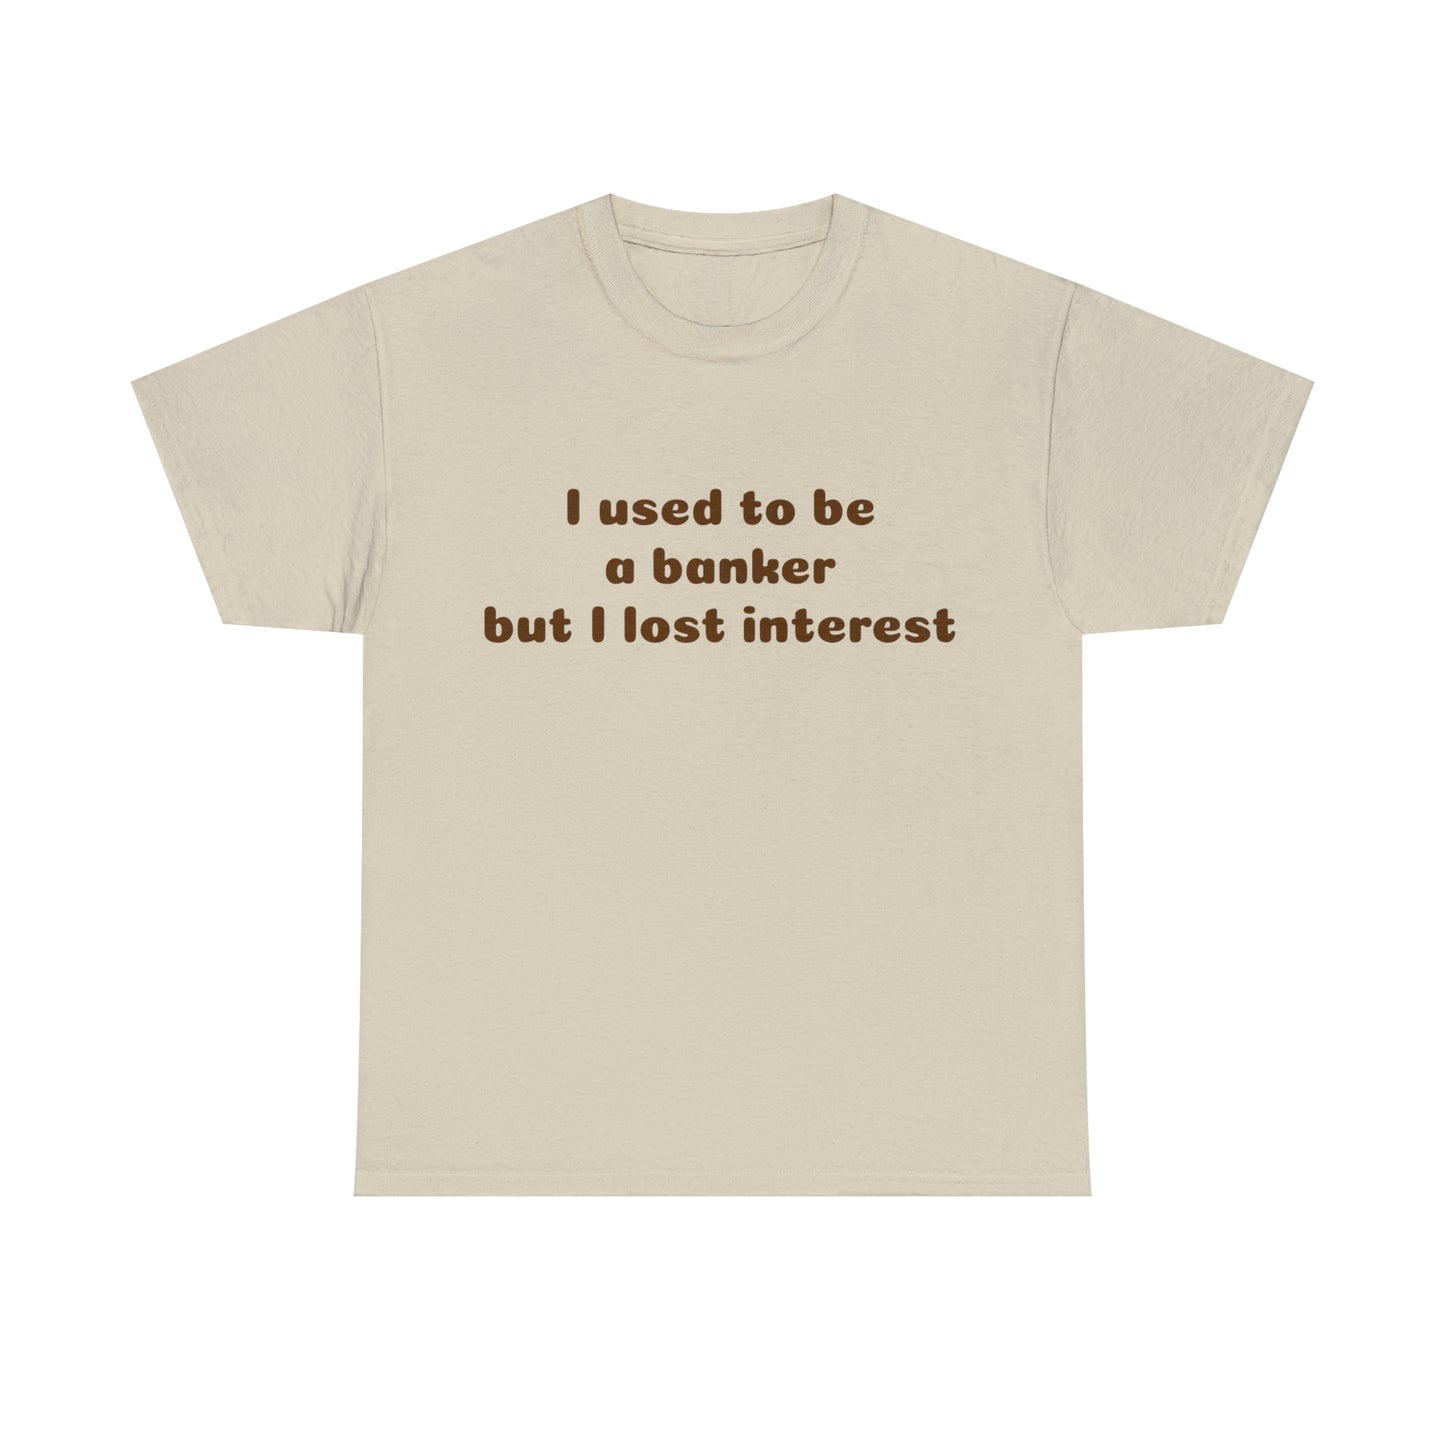 Custom Parody T-shirt, I used to be a banker but i lost interest shirt design